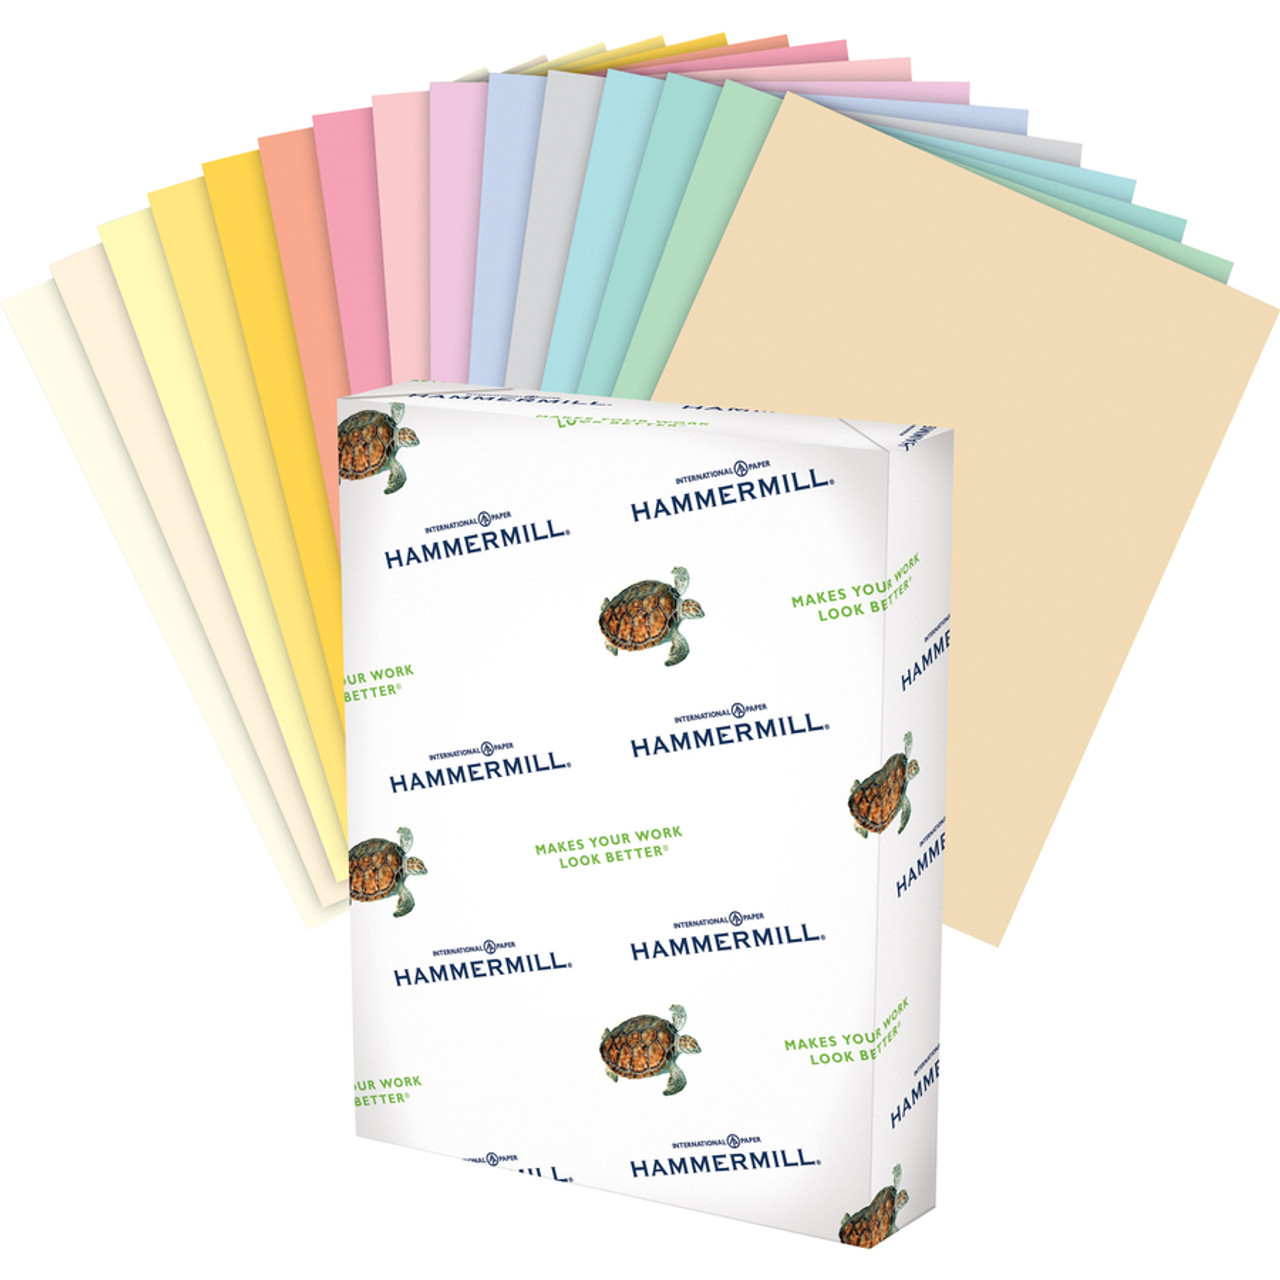 Hammermill Paper for Copy 8.5x11 Laser, Inkjet Colored Paper - Blue -  Recycled - 30% Recycled Content - HAM103309 